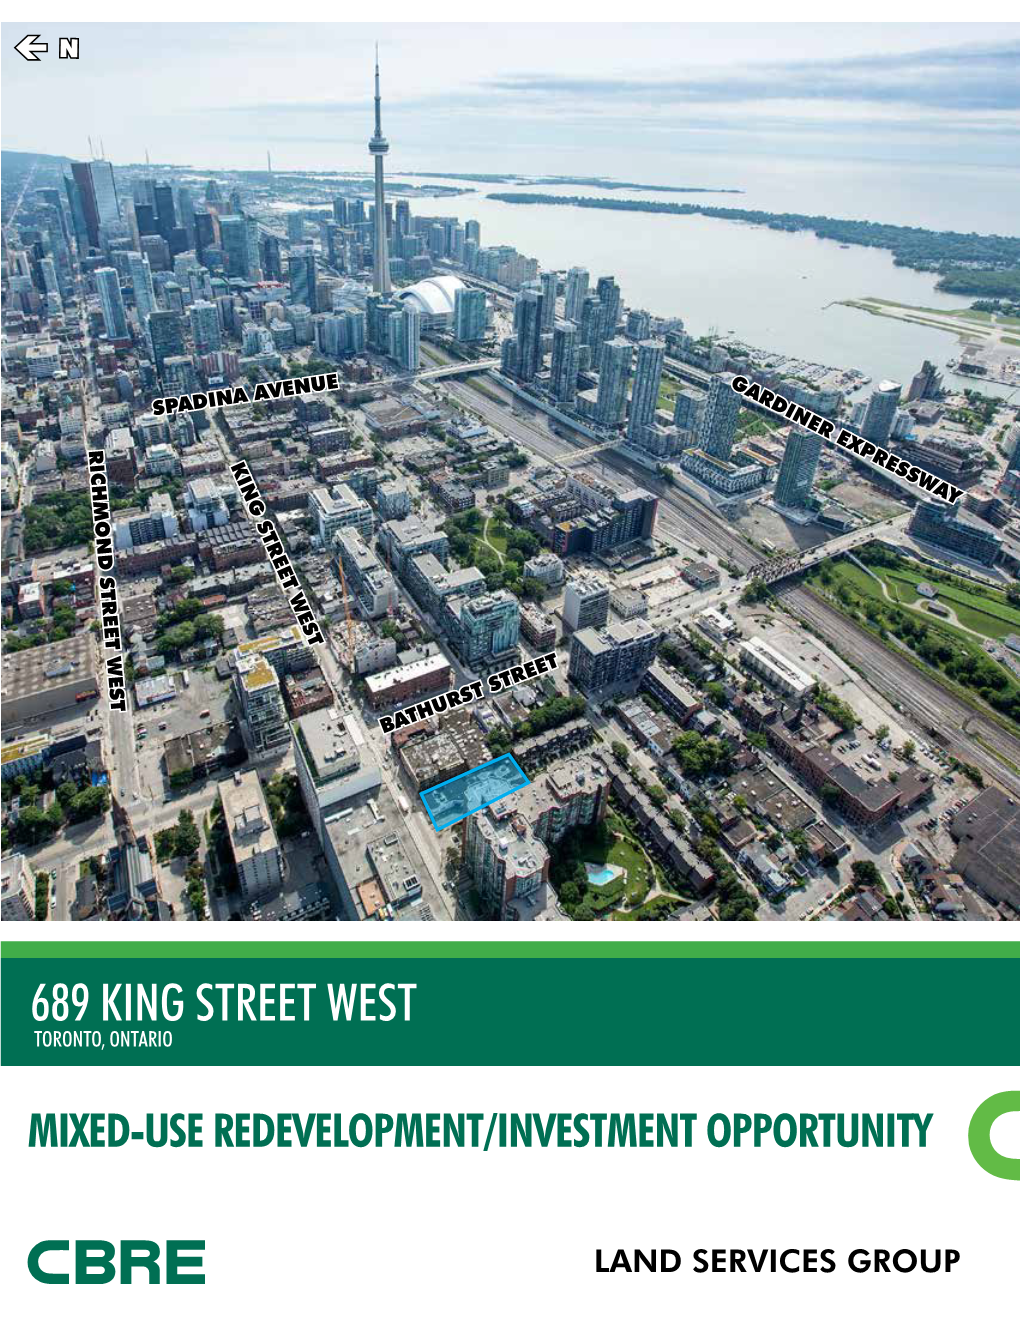 689 King Street West Toronto, Ontario Mixed-Use Redevelopment/Investment Opportunity